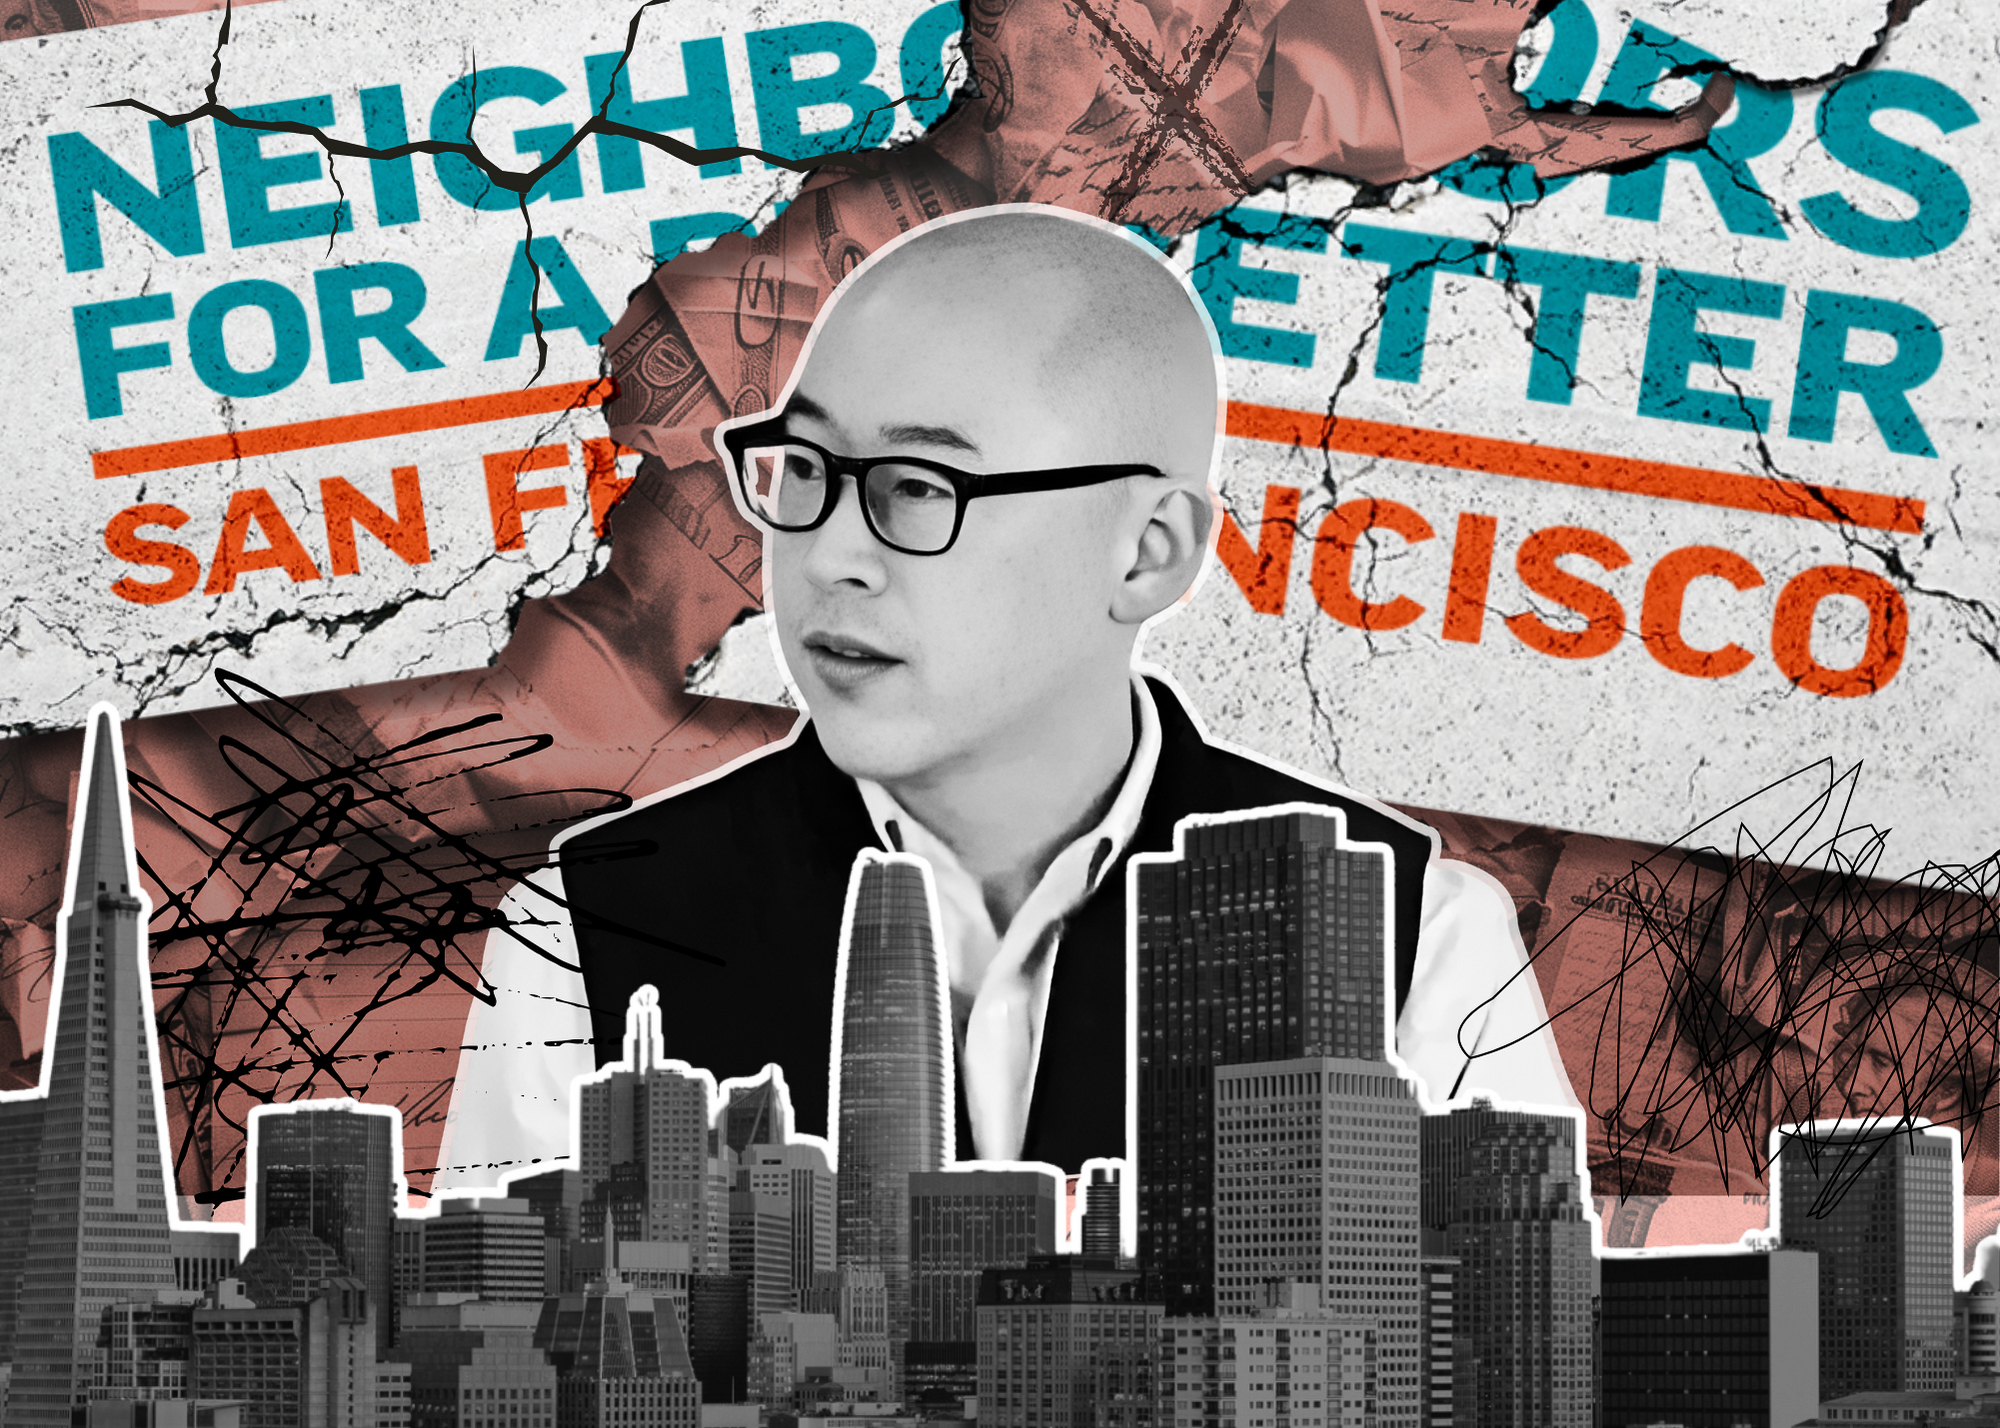 A collage featuring Jay Cheng, city skyline, text "Neighbors for a Better San Francisco," and scribbles.